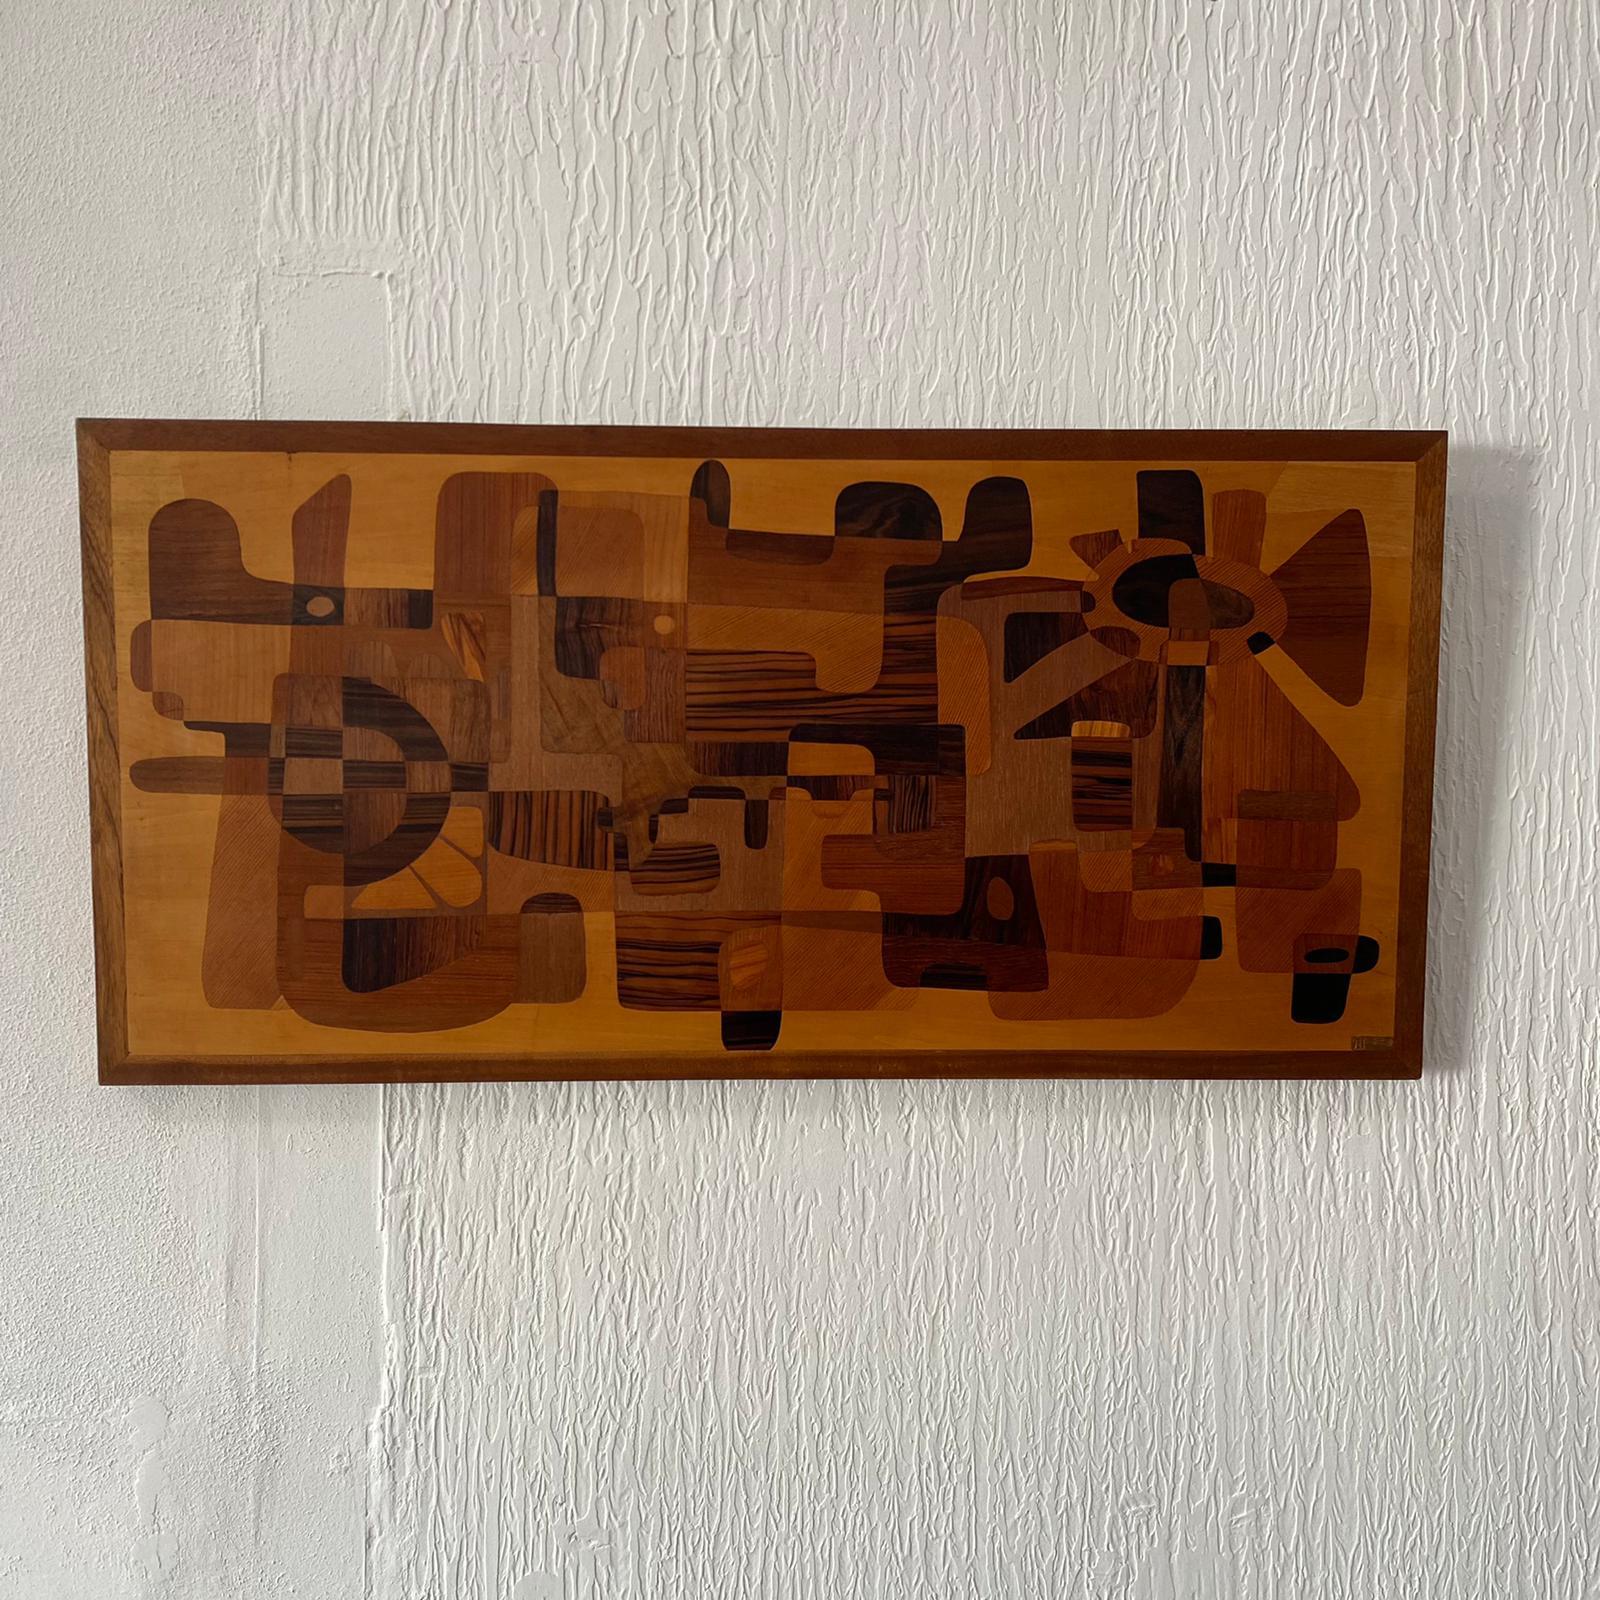 Large Marquetry Geometric Panel Wall Art, Mid Century Modern In Good Condition For Sale In Somerton, GB